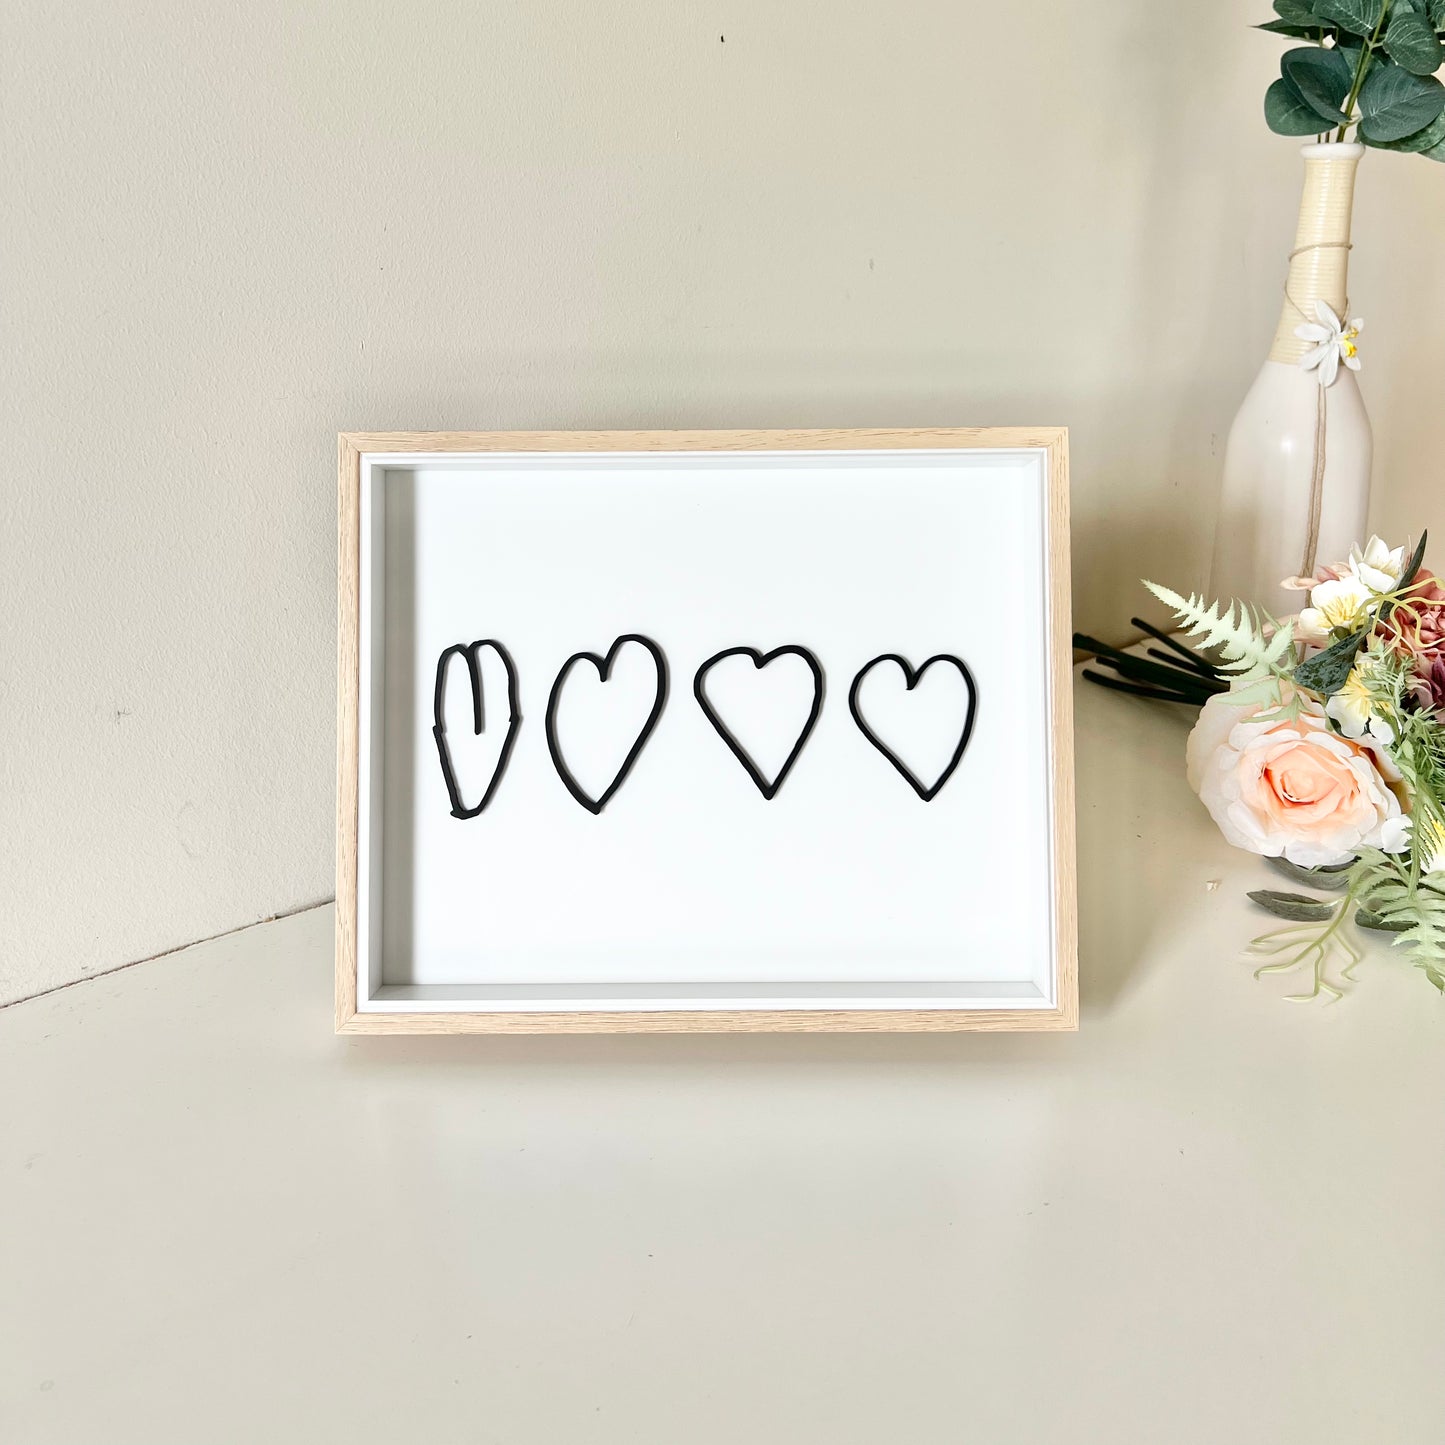 Hand-Drawn Heart in Frame